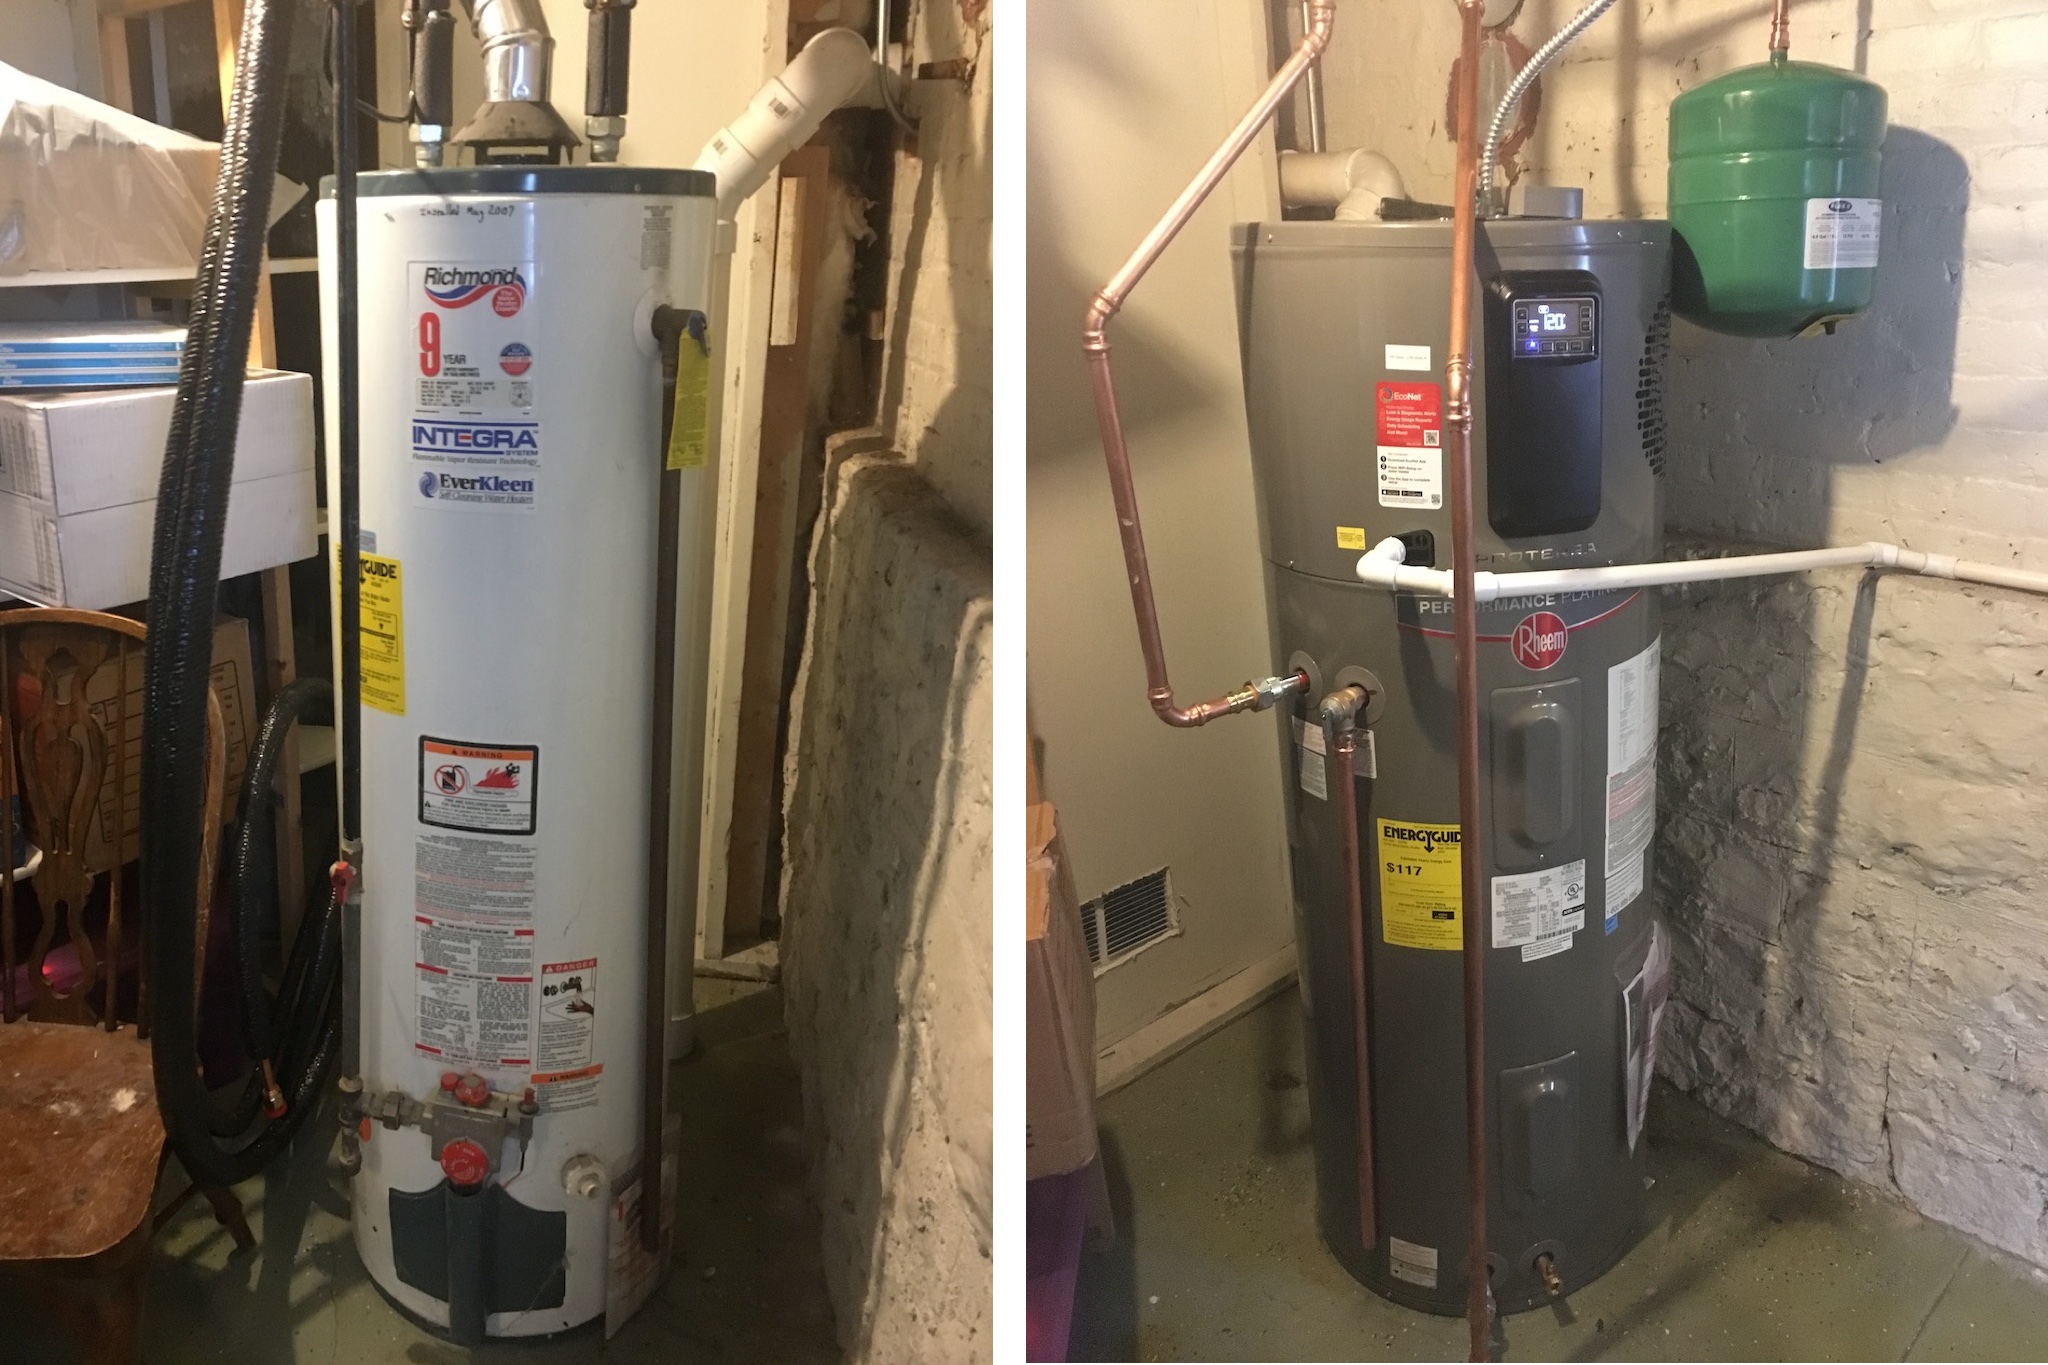 Left: our old gas water heater. Right: our new heat pump water heater